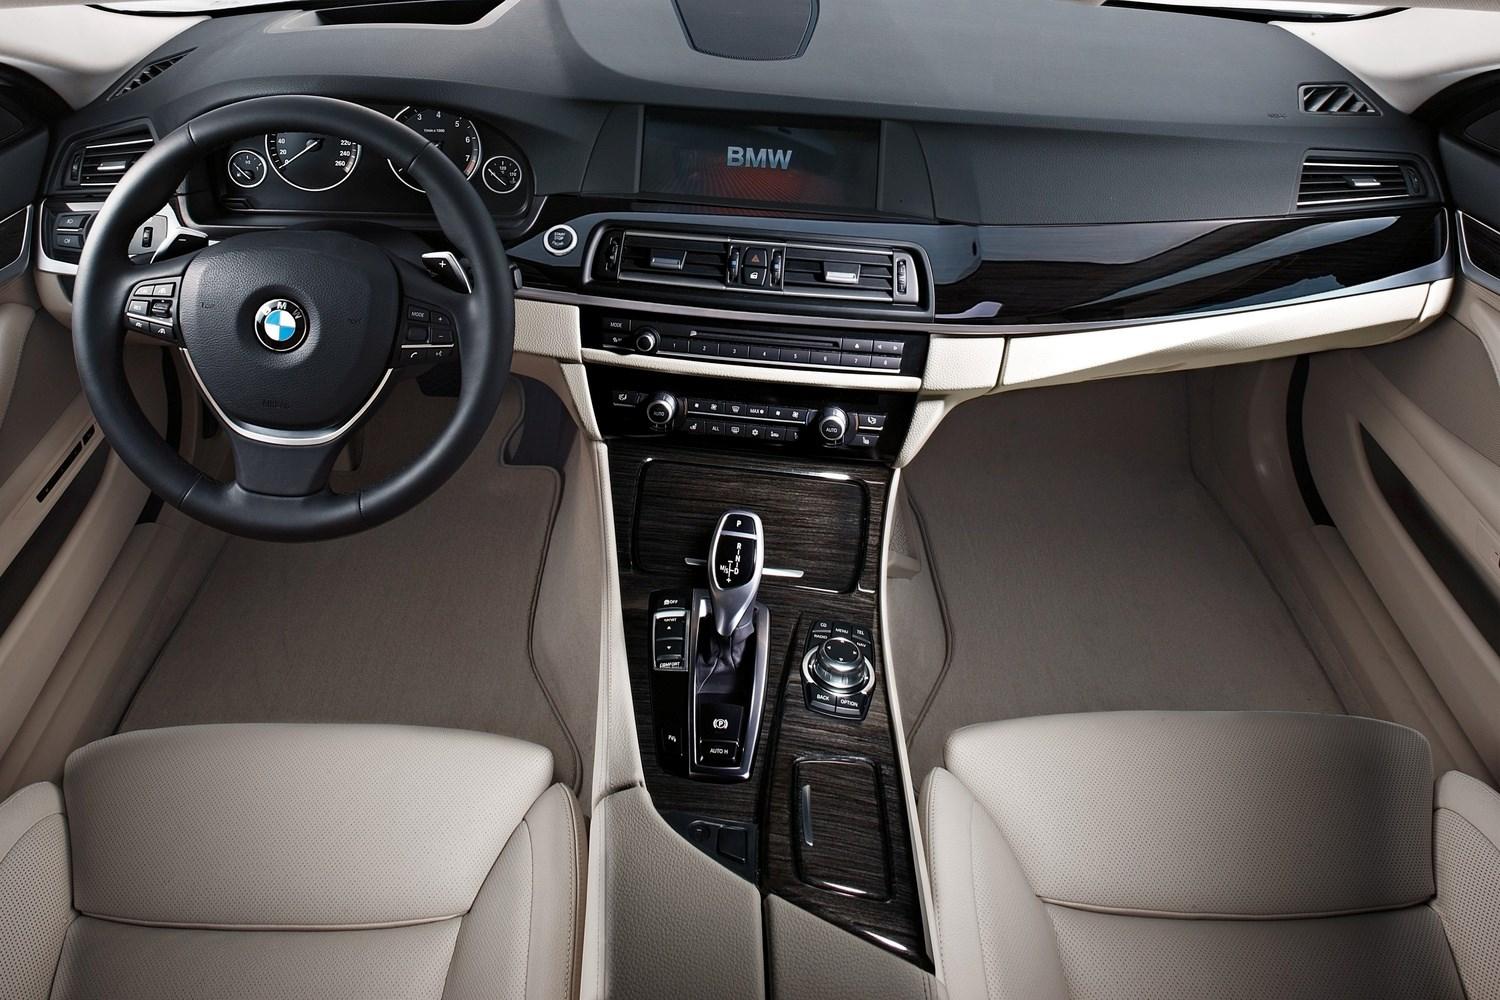 Interior view of a BMW vehicle with close-up on steering wheel, dashboard and infotainment system